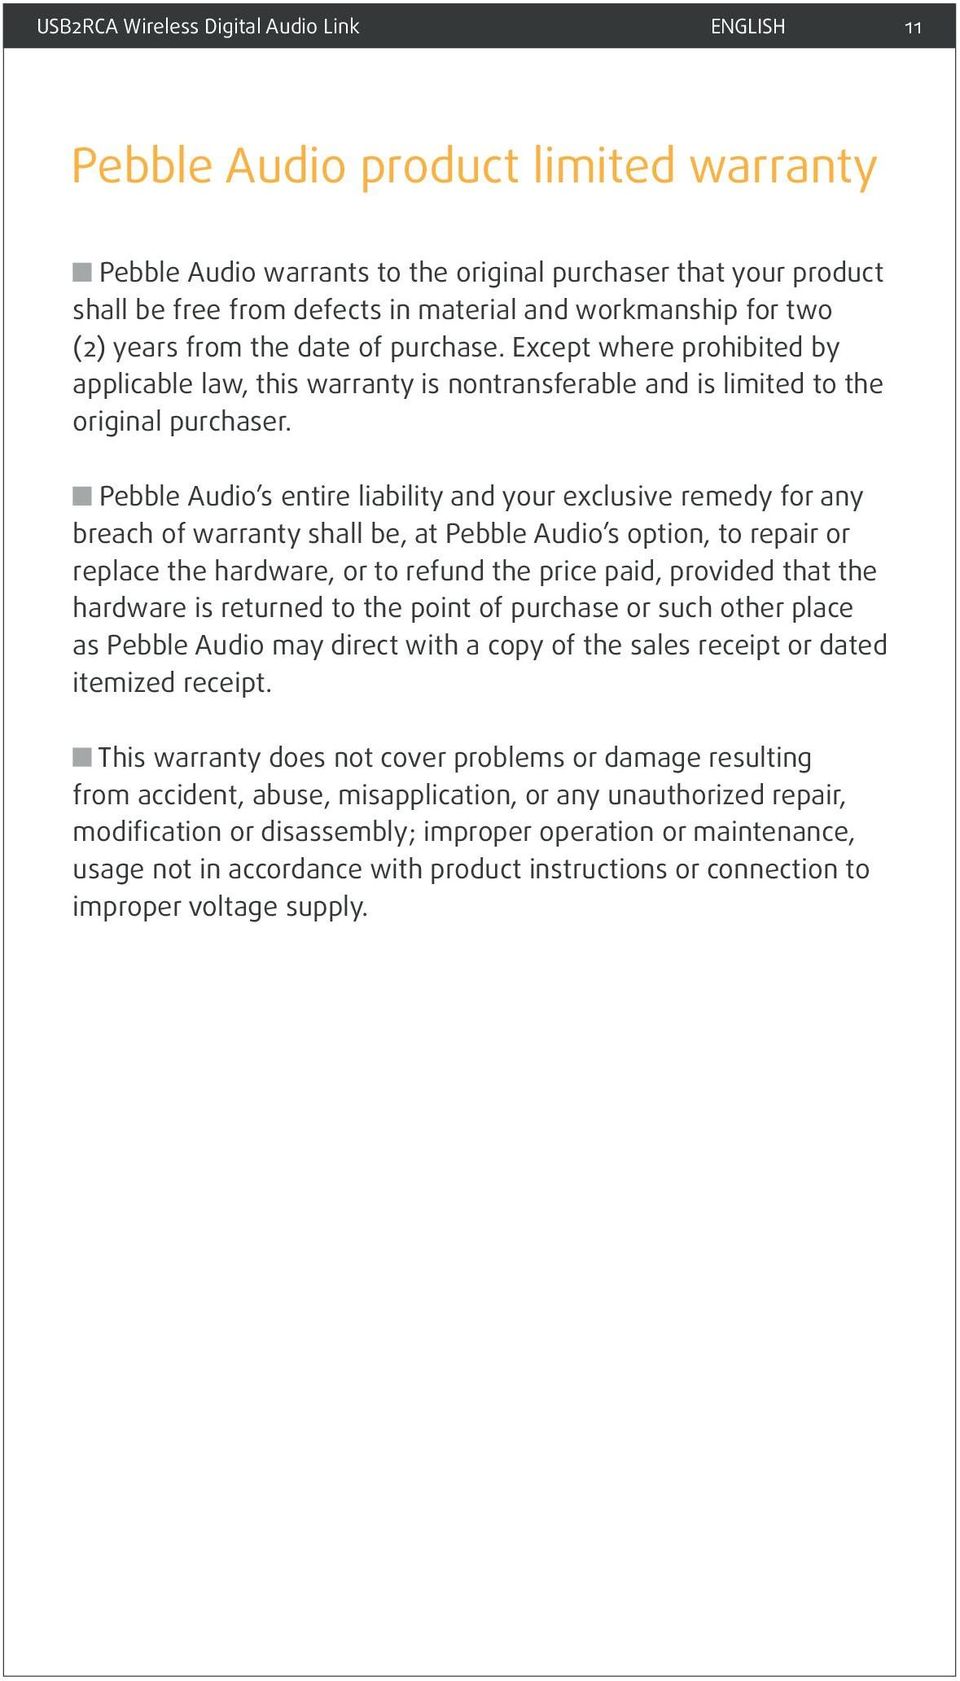 Pebble Audio s entire liability and your exclusive remedy for any breach of warranty shall be, at Pebble Audio s option, to repair or replace the hardware, or to refund the price paid, provided that